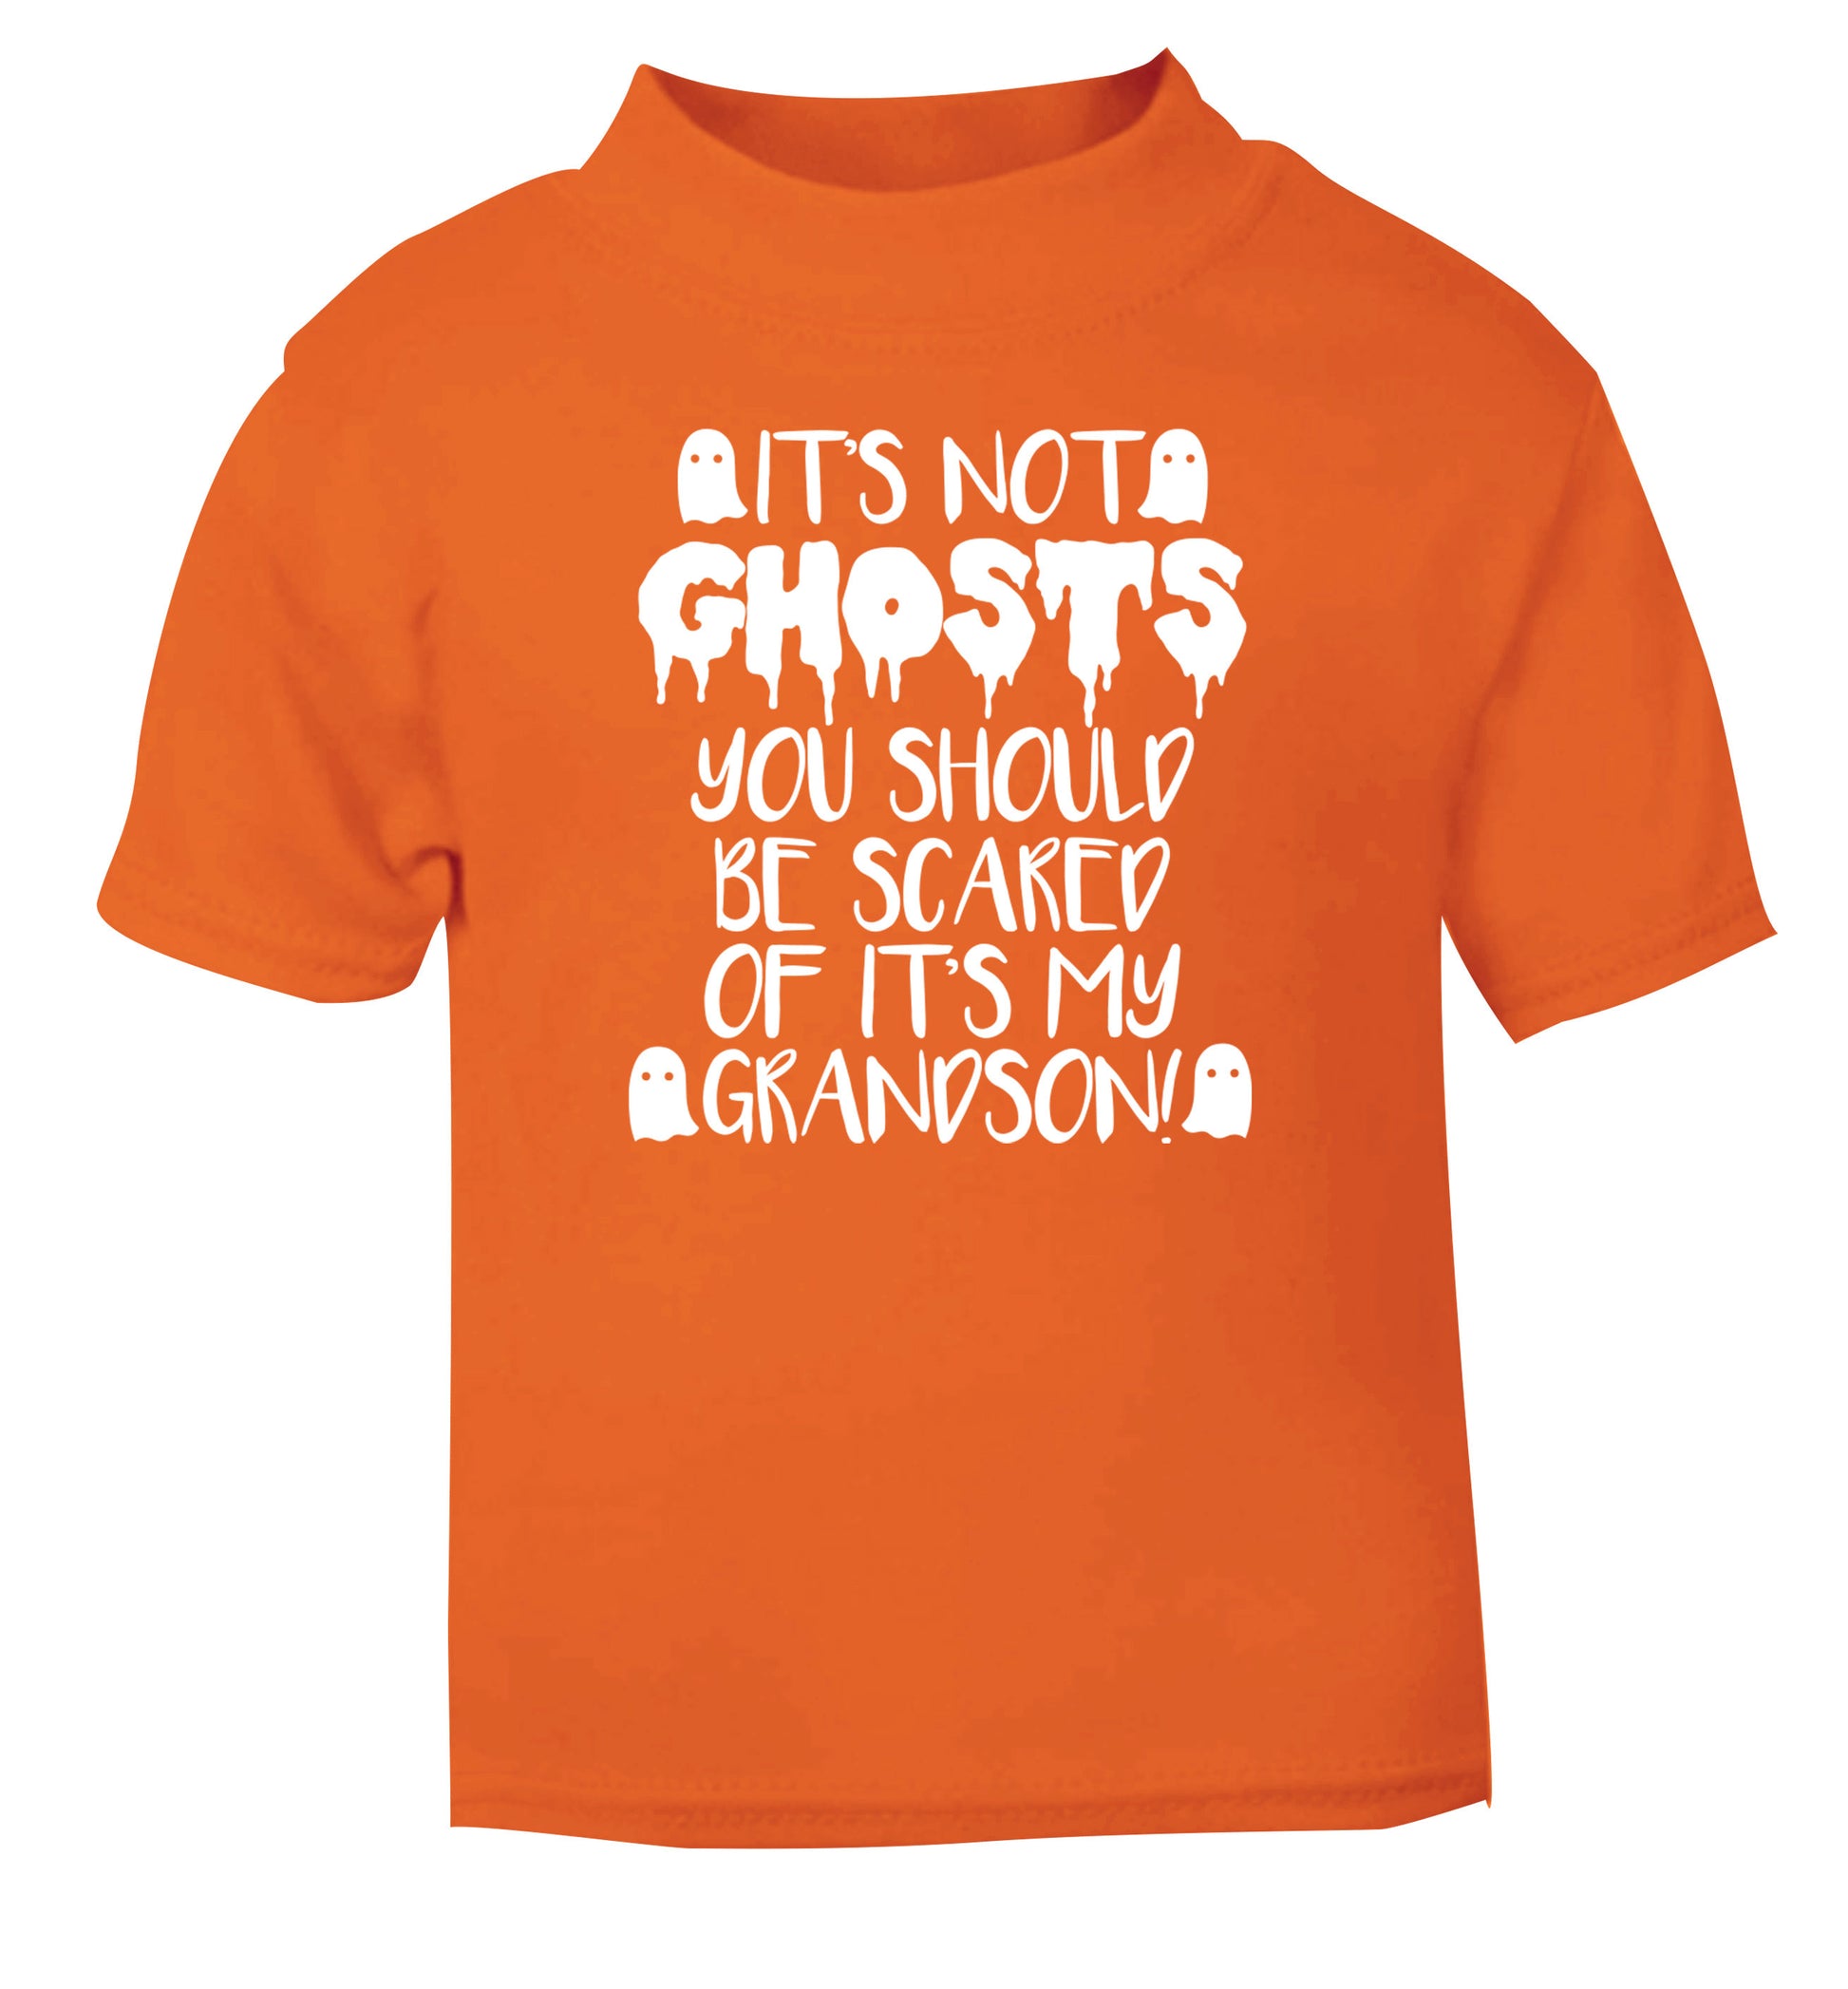 It's not ghosts you should be scared of it's my grandson! orange Baby Toddler Tshirt 2 Years